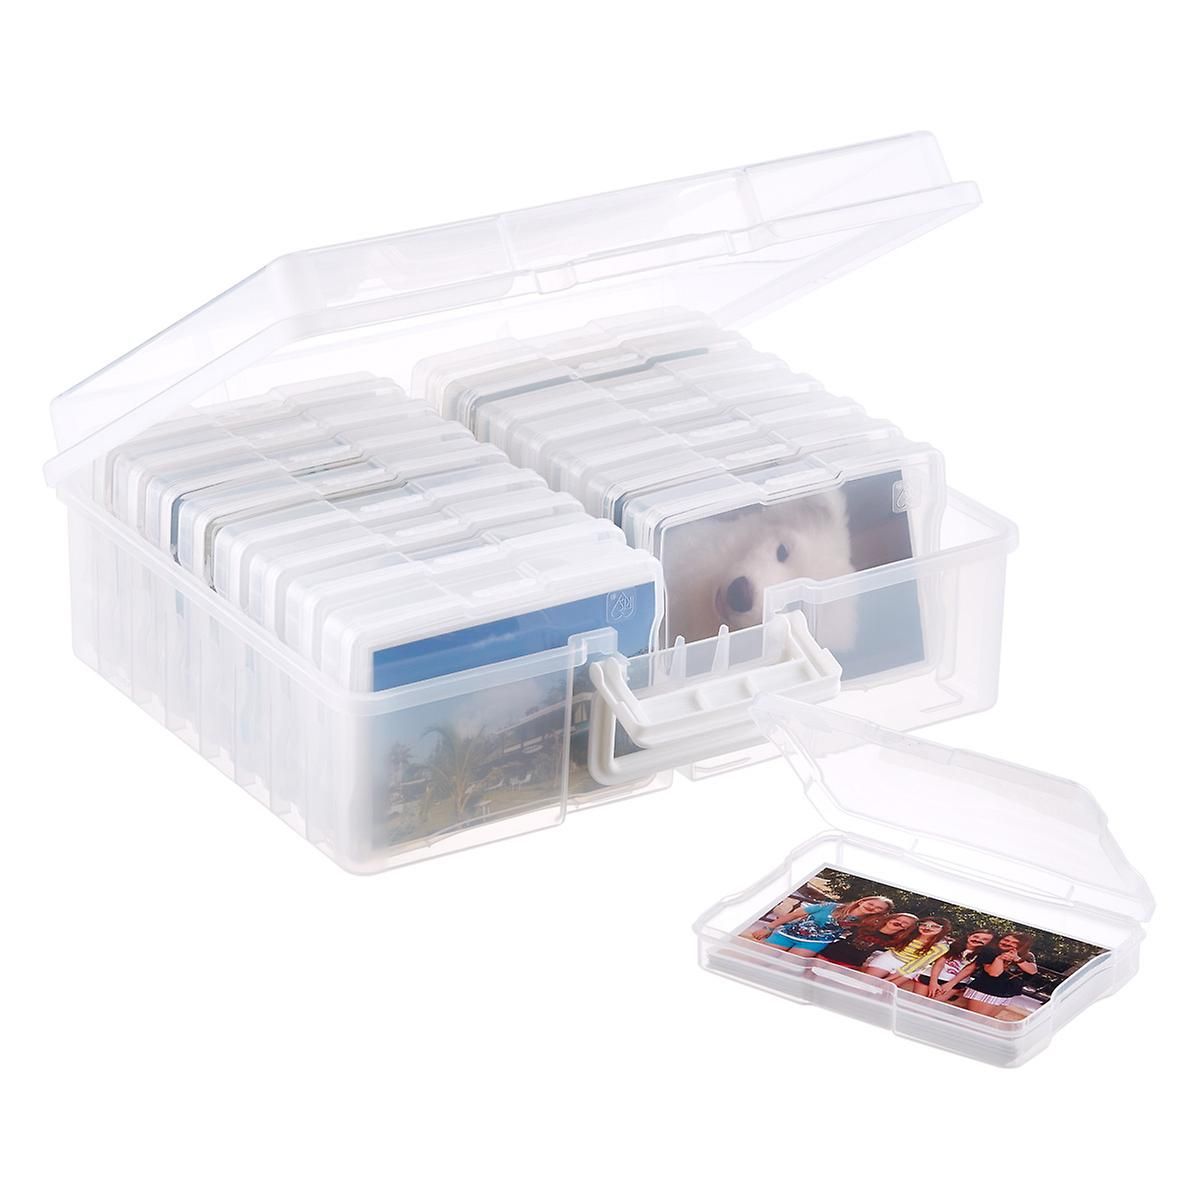 Iris 16-Case 4" x 6" Photo & Craft Storage Carrier | The Container Store